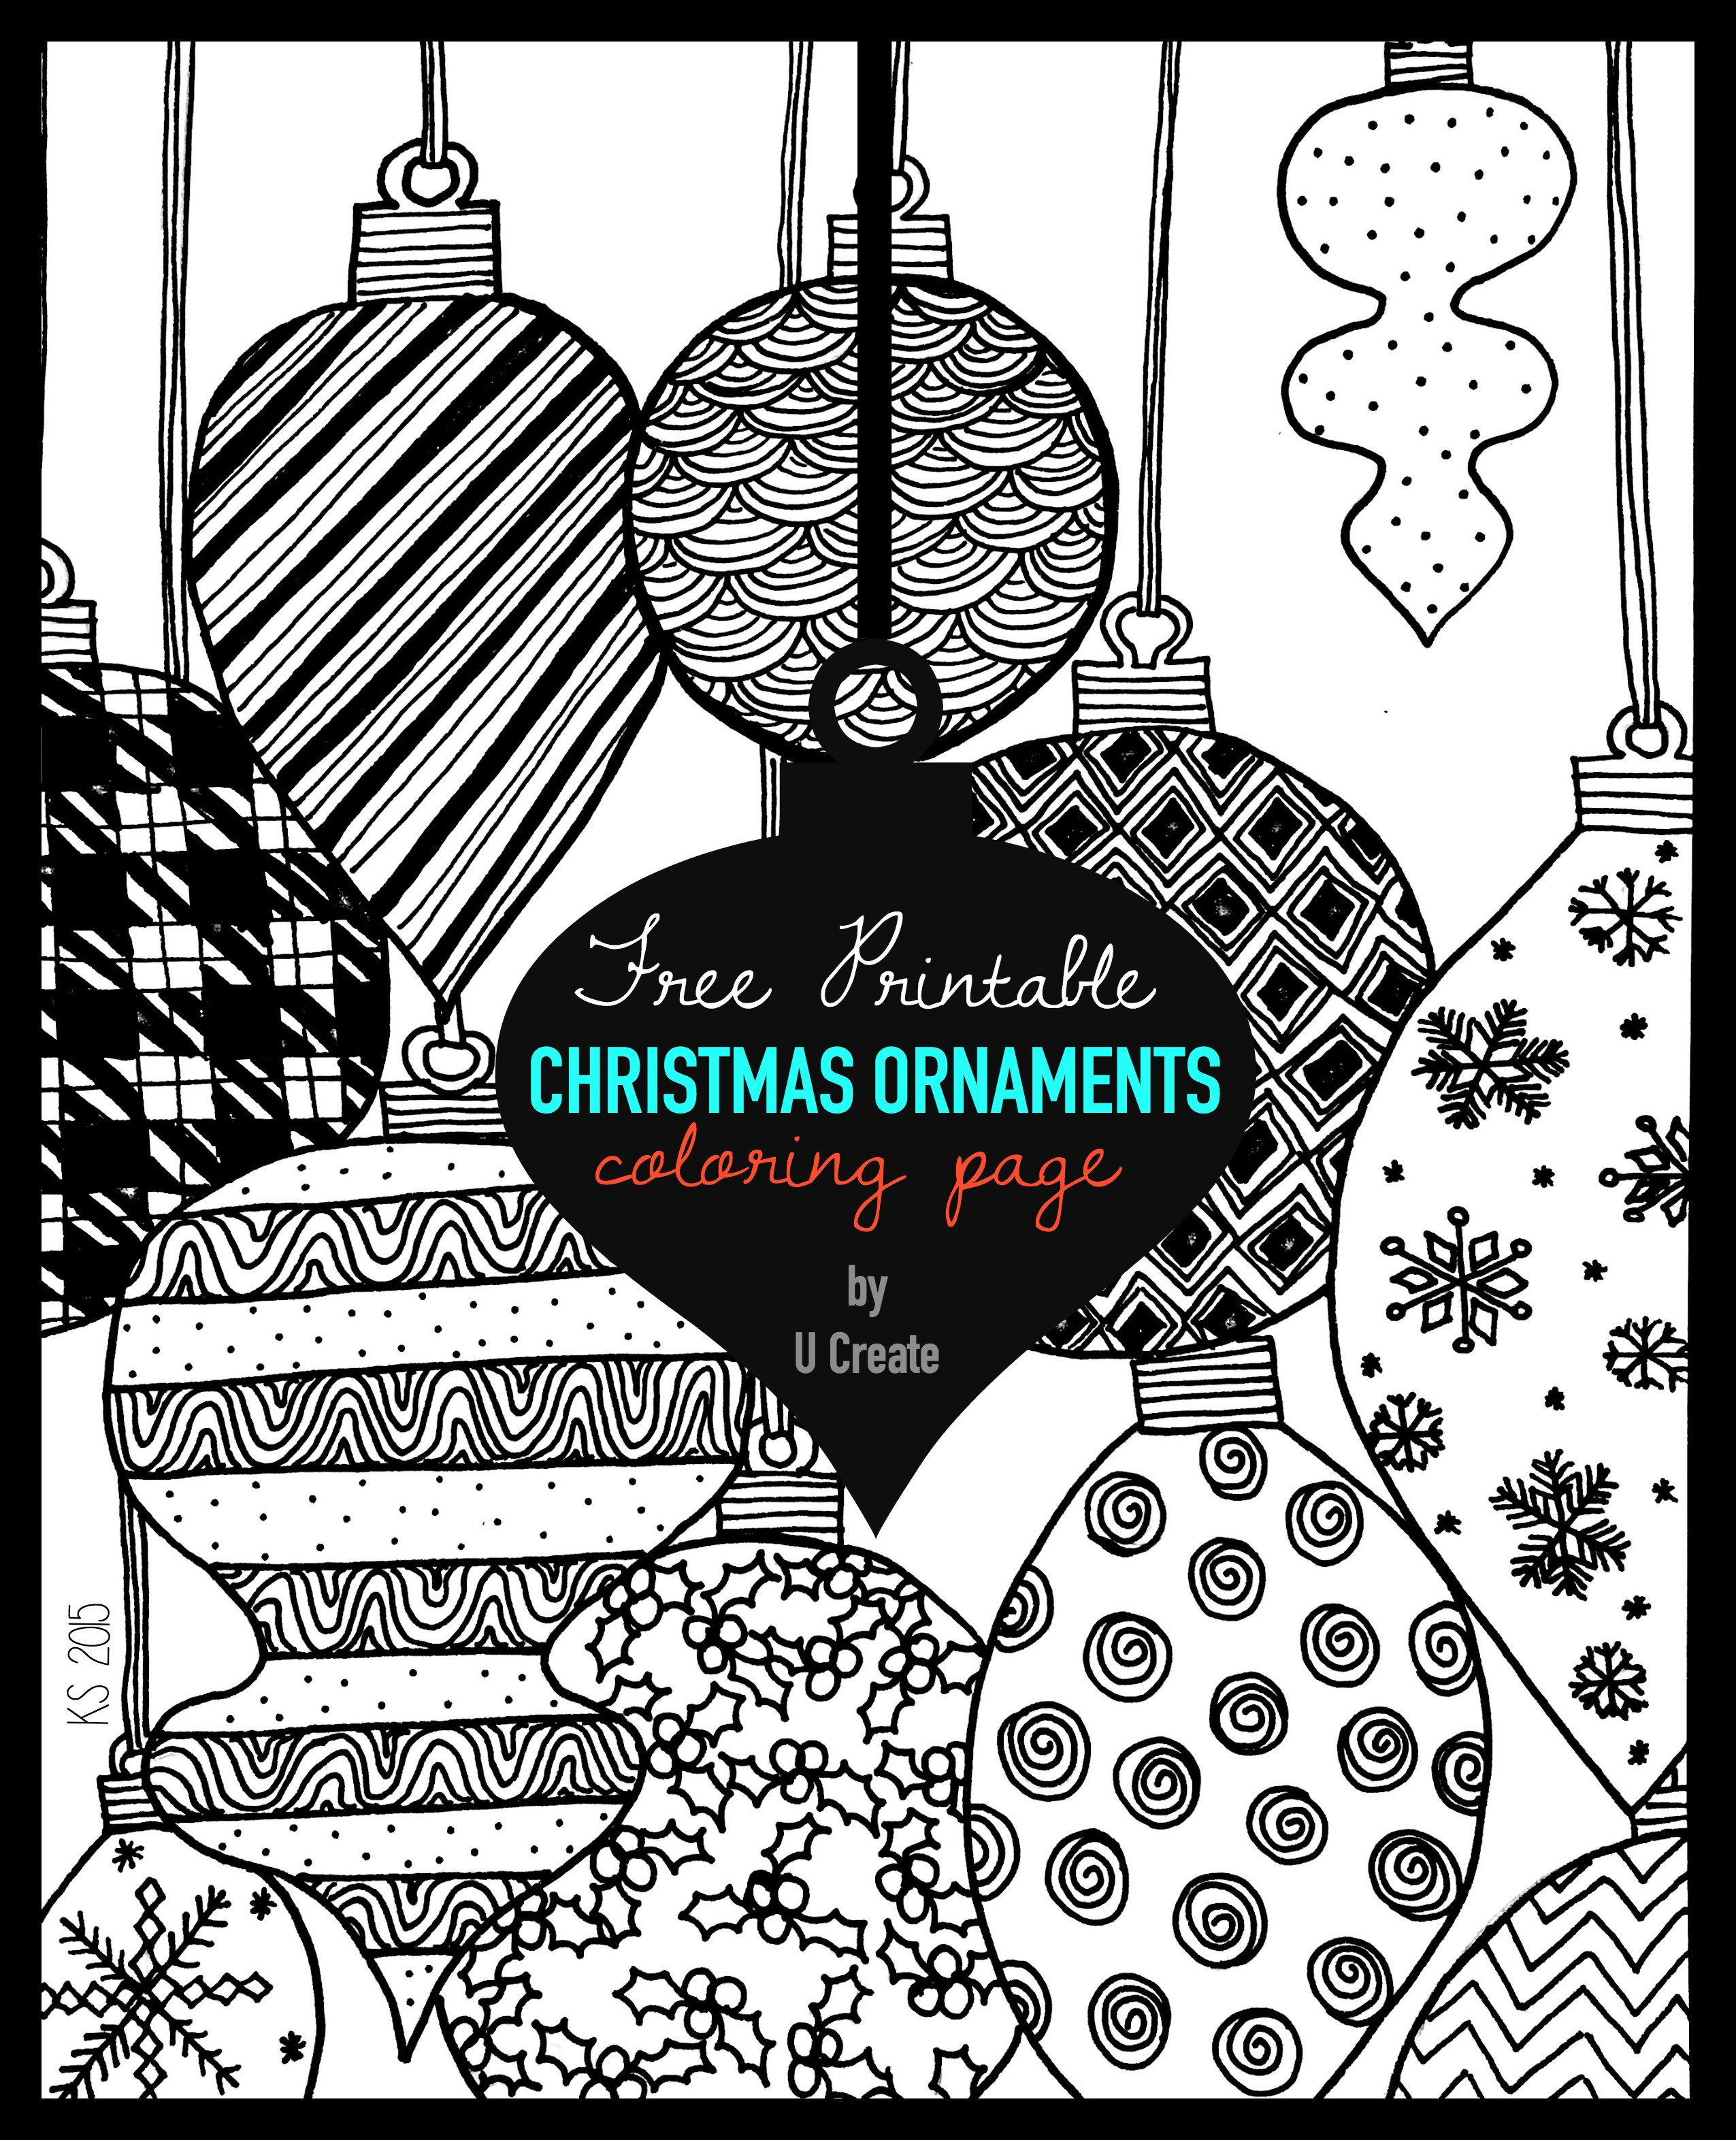 Christmas Ornaments Coloring Pages Printable
 Christmas Ornaments Adult Coloring Page U Create